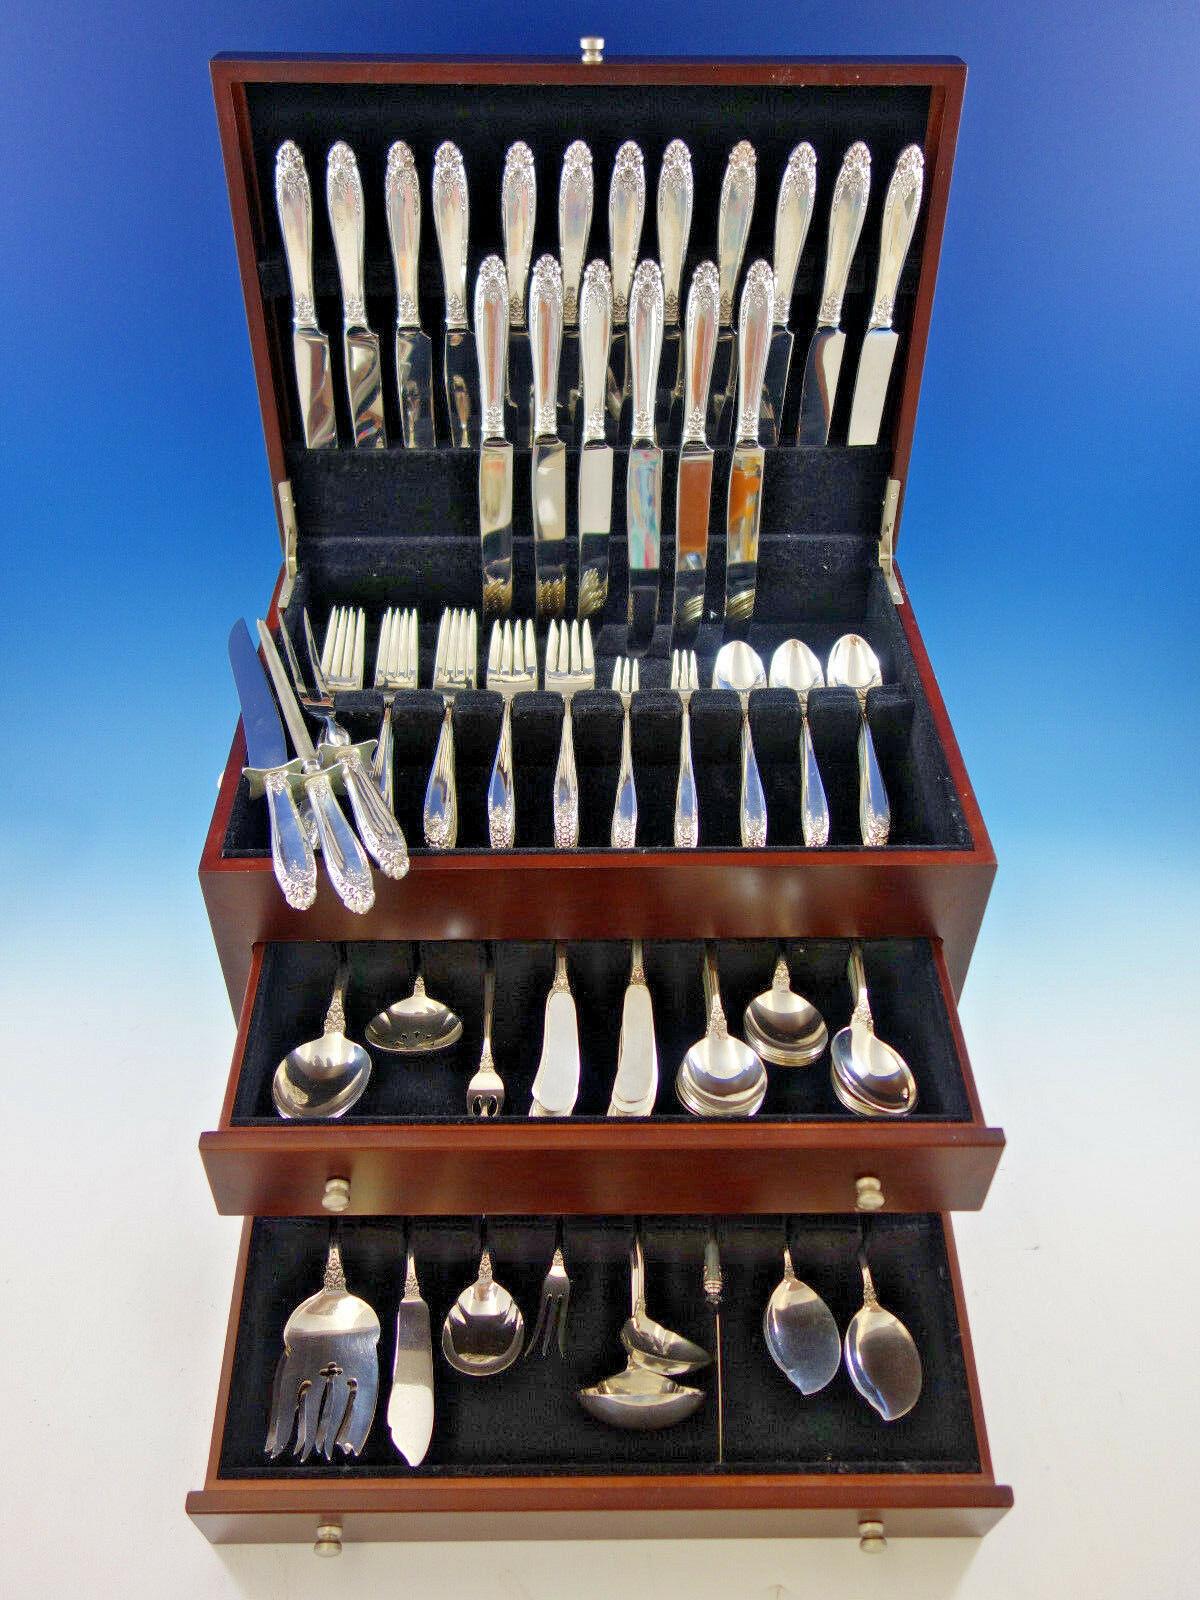 Huge service for 18 in the pattern Prelude by International sterling silver flatware set of 142 pieces. Perfect for large gatherings! This set includes:

18 knives, 9 1/4
18 forks, 7 1/4